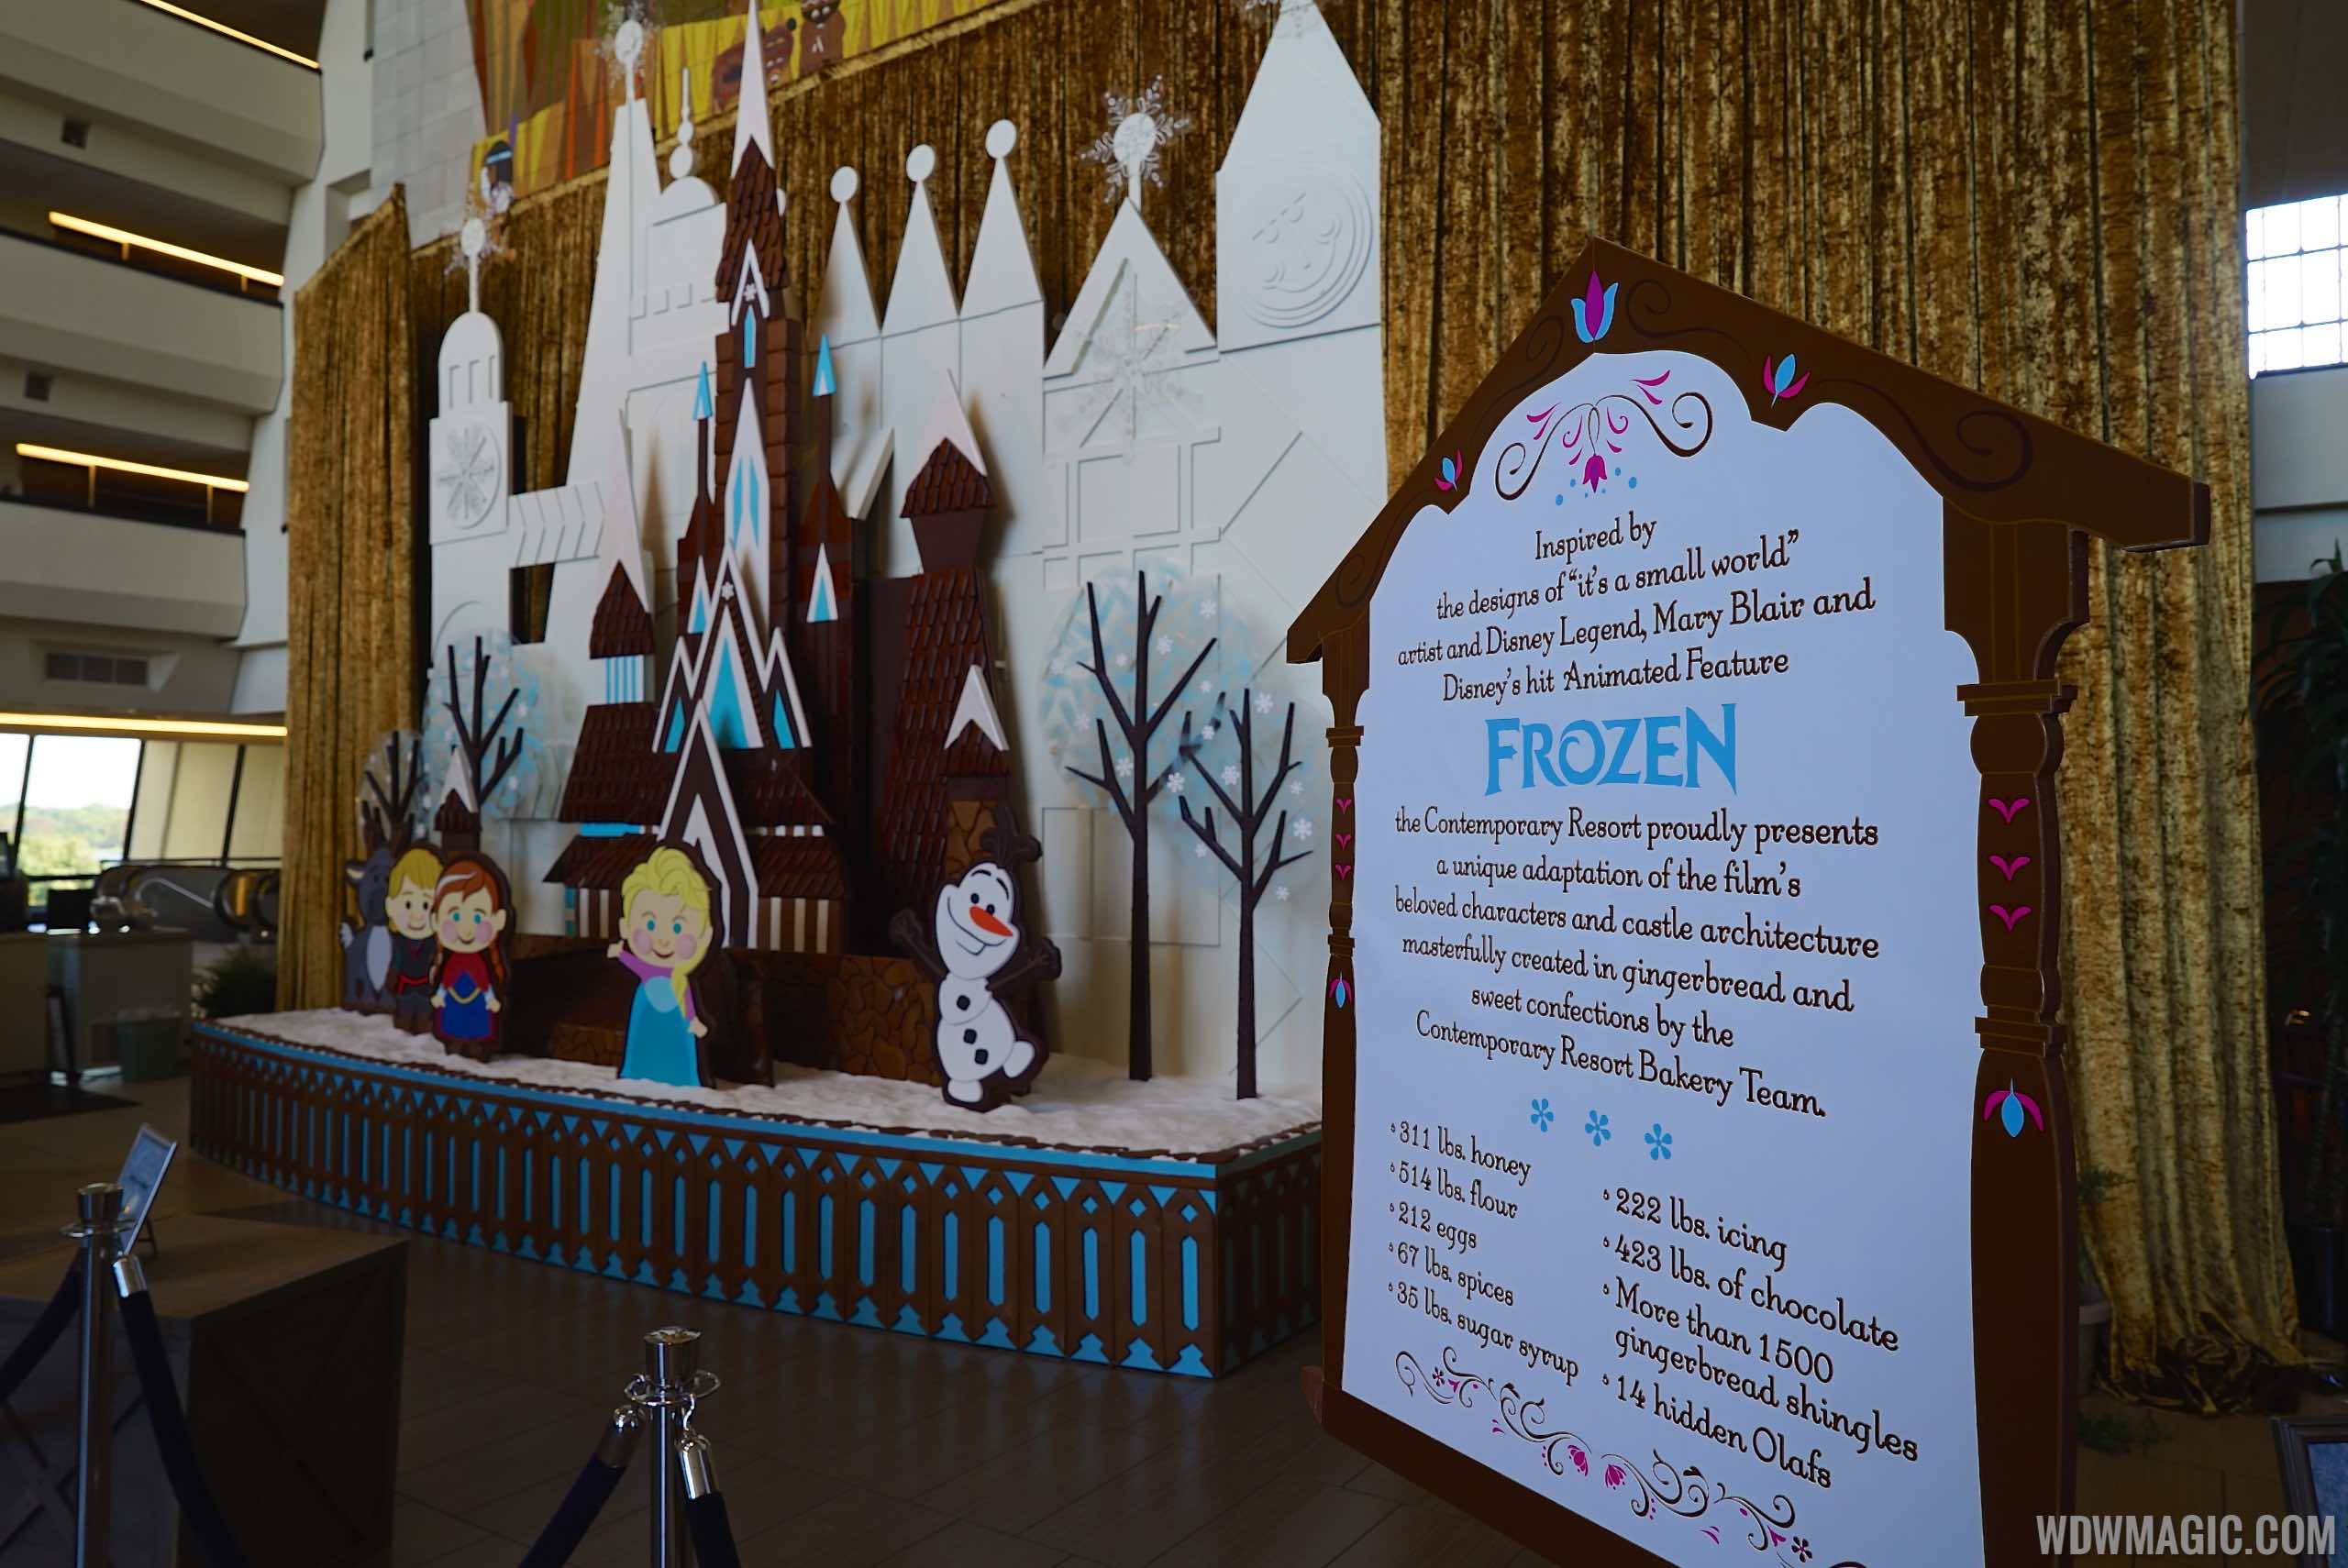 The Frozen Gingerbread display